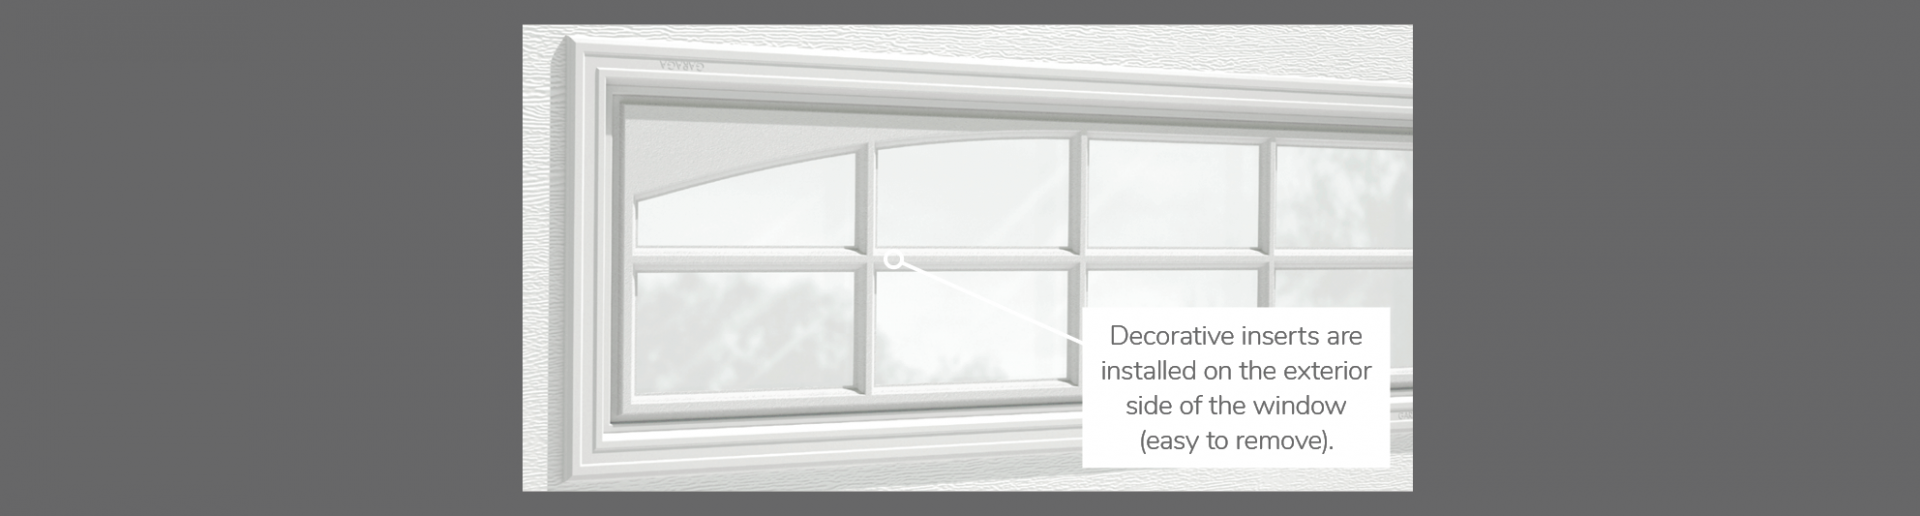 Double Stockton Arch Decorative Inserts, 40" x 13", available for door R-16 and R-12